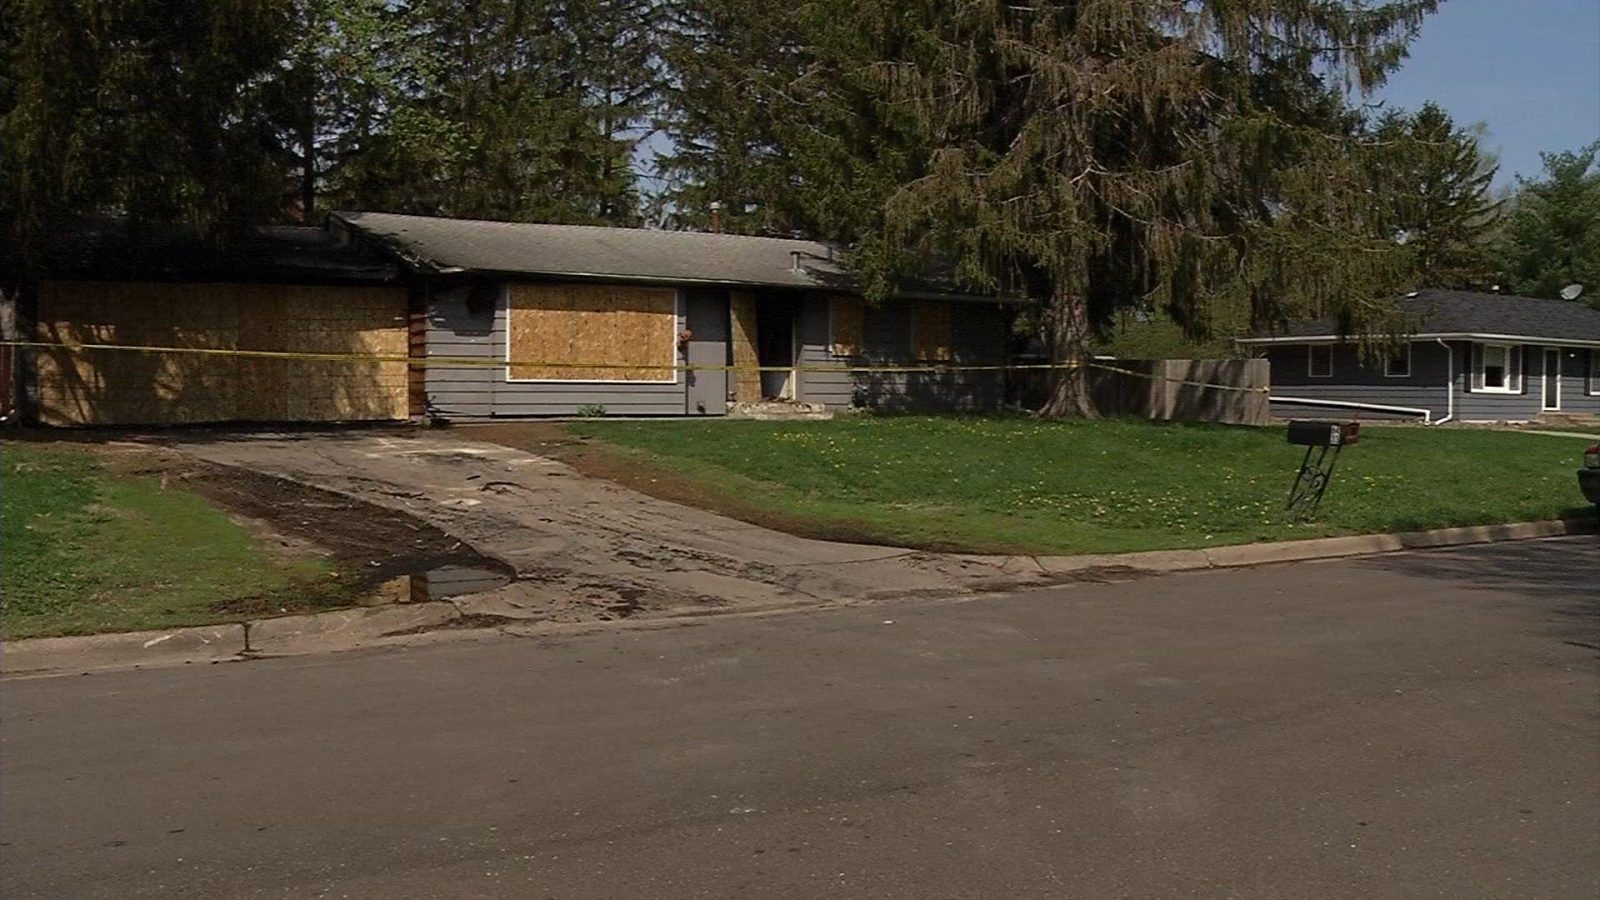 Brooklyn Park home damaged by suspected arson, suspect arrested